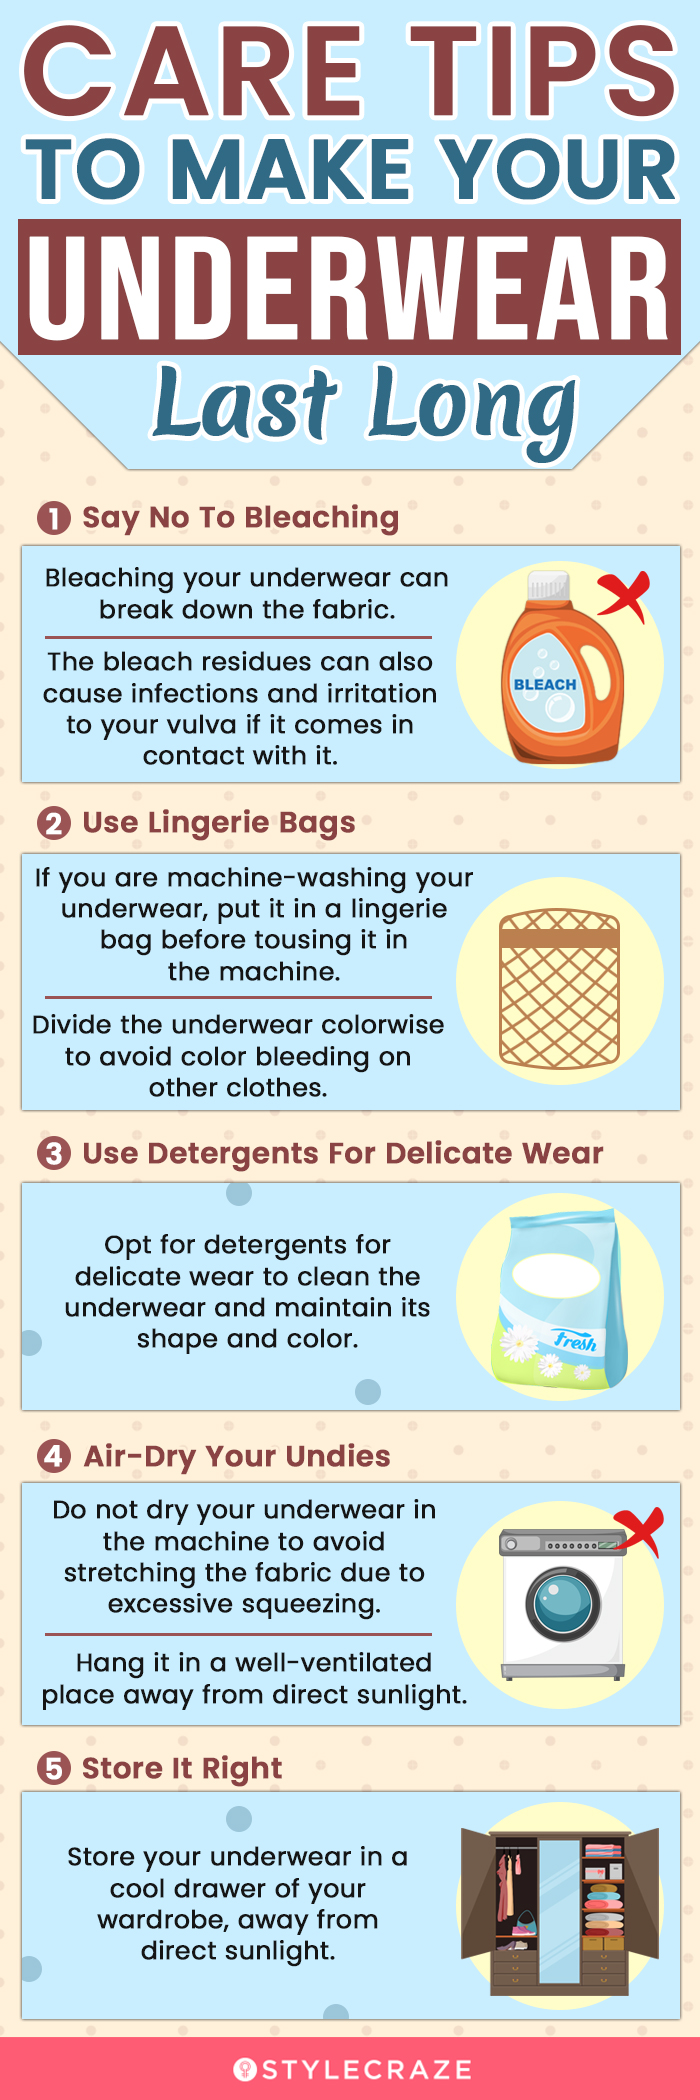 Care Tips To Make Your Underwears Last Long (infographic)